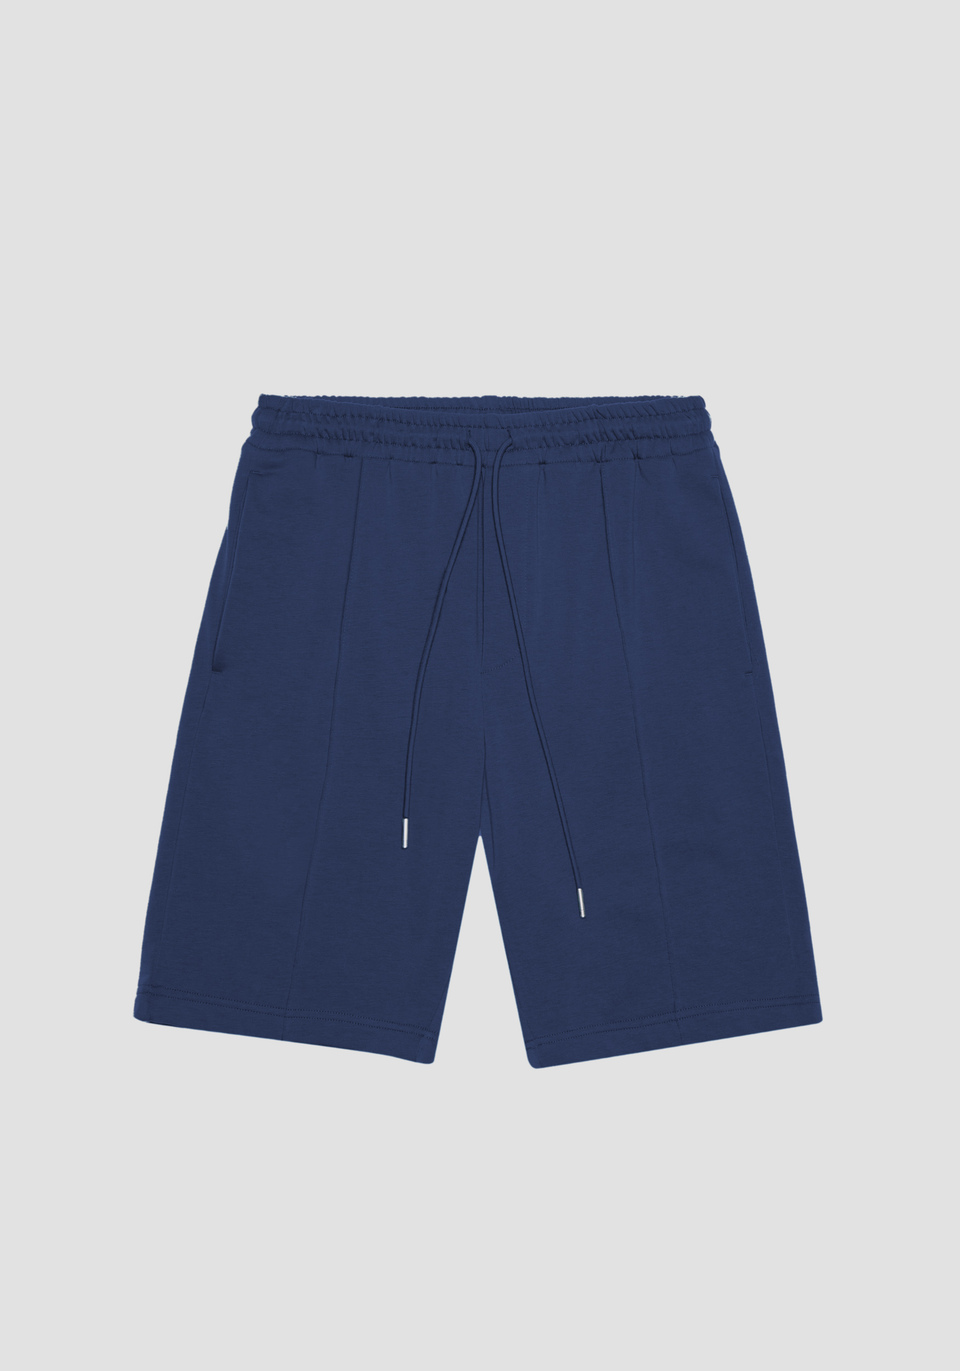 CARROT FIT SHORTS IN STRETCH COTTON BLEND WITH CENTRAL PLEAT - Antony Morato Online Shop